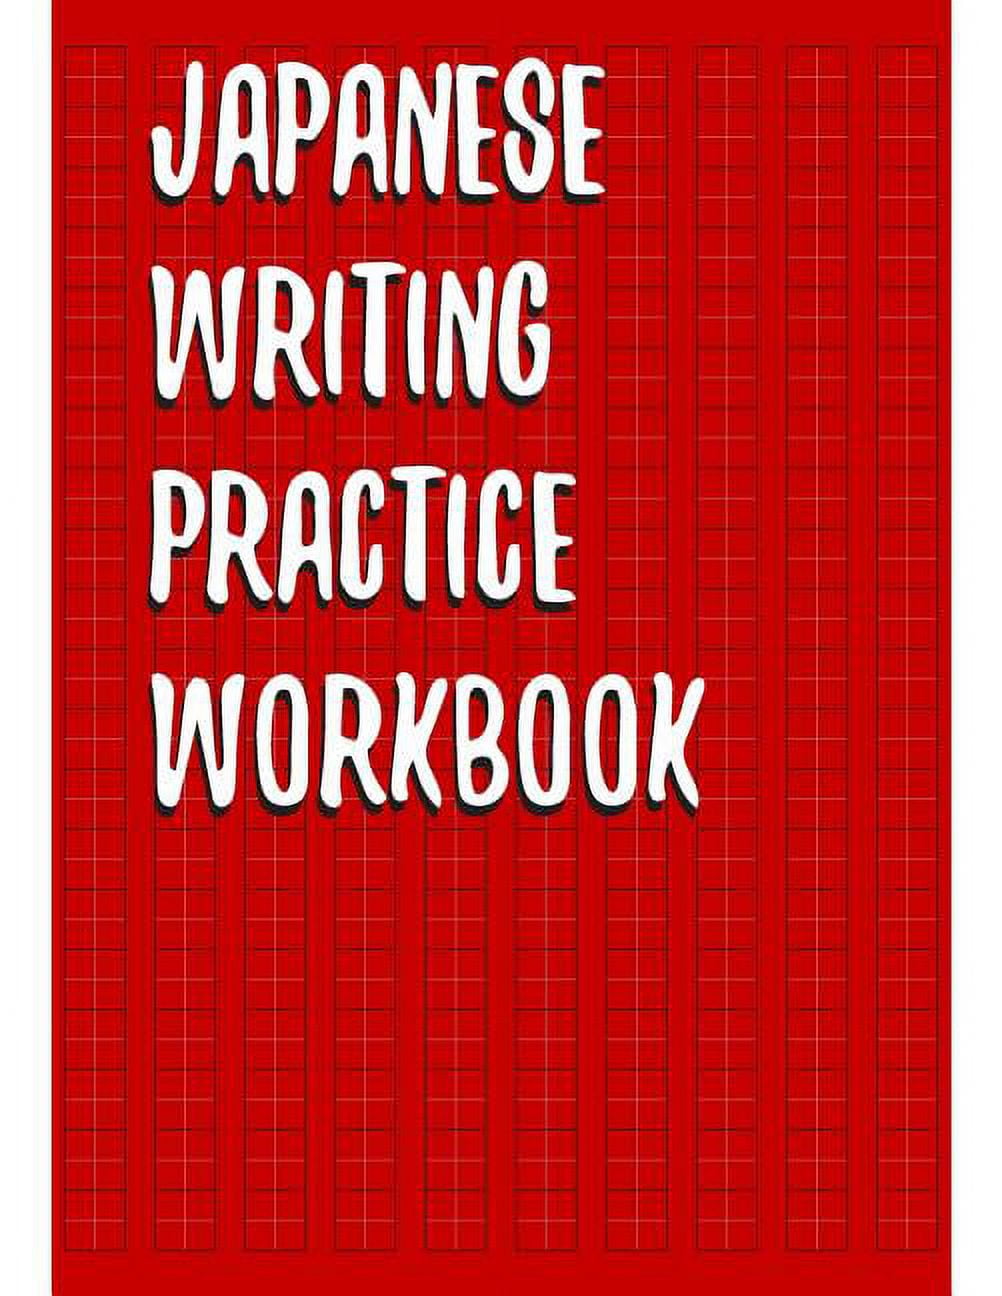 Japanese Writing Practice Book: Blue Sea Dragon Cover With Genkouyoushi  Paper to Practise Writing Japanese Kanji Characters and Cornell Notes - 6x9  - (Paperback)